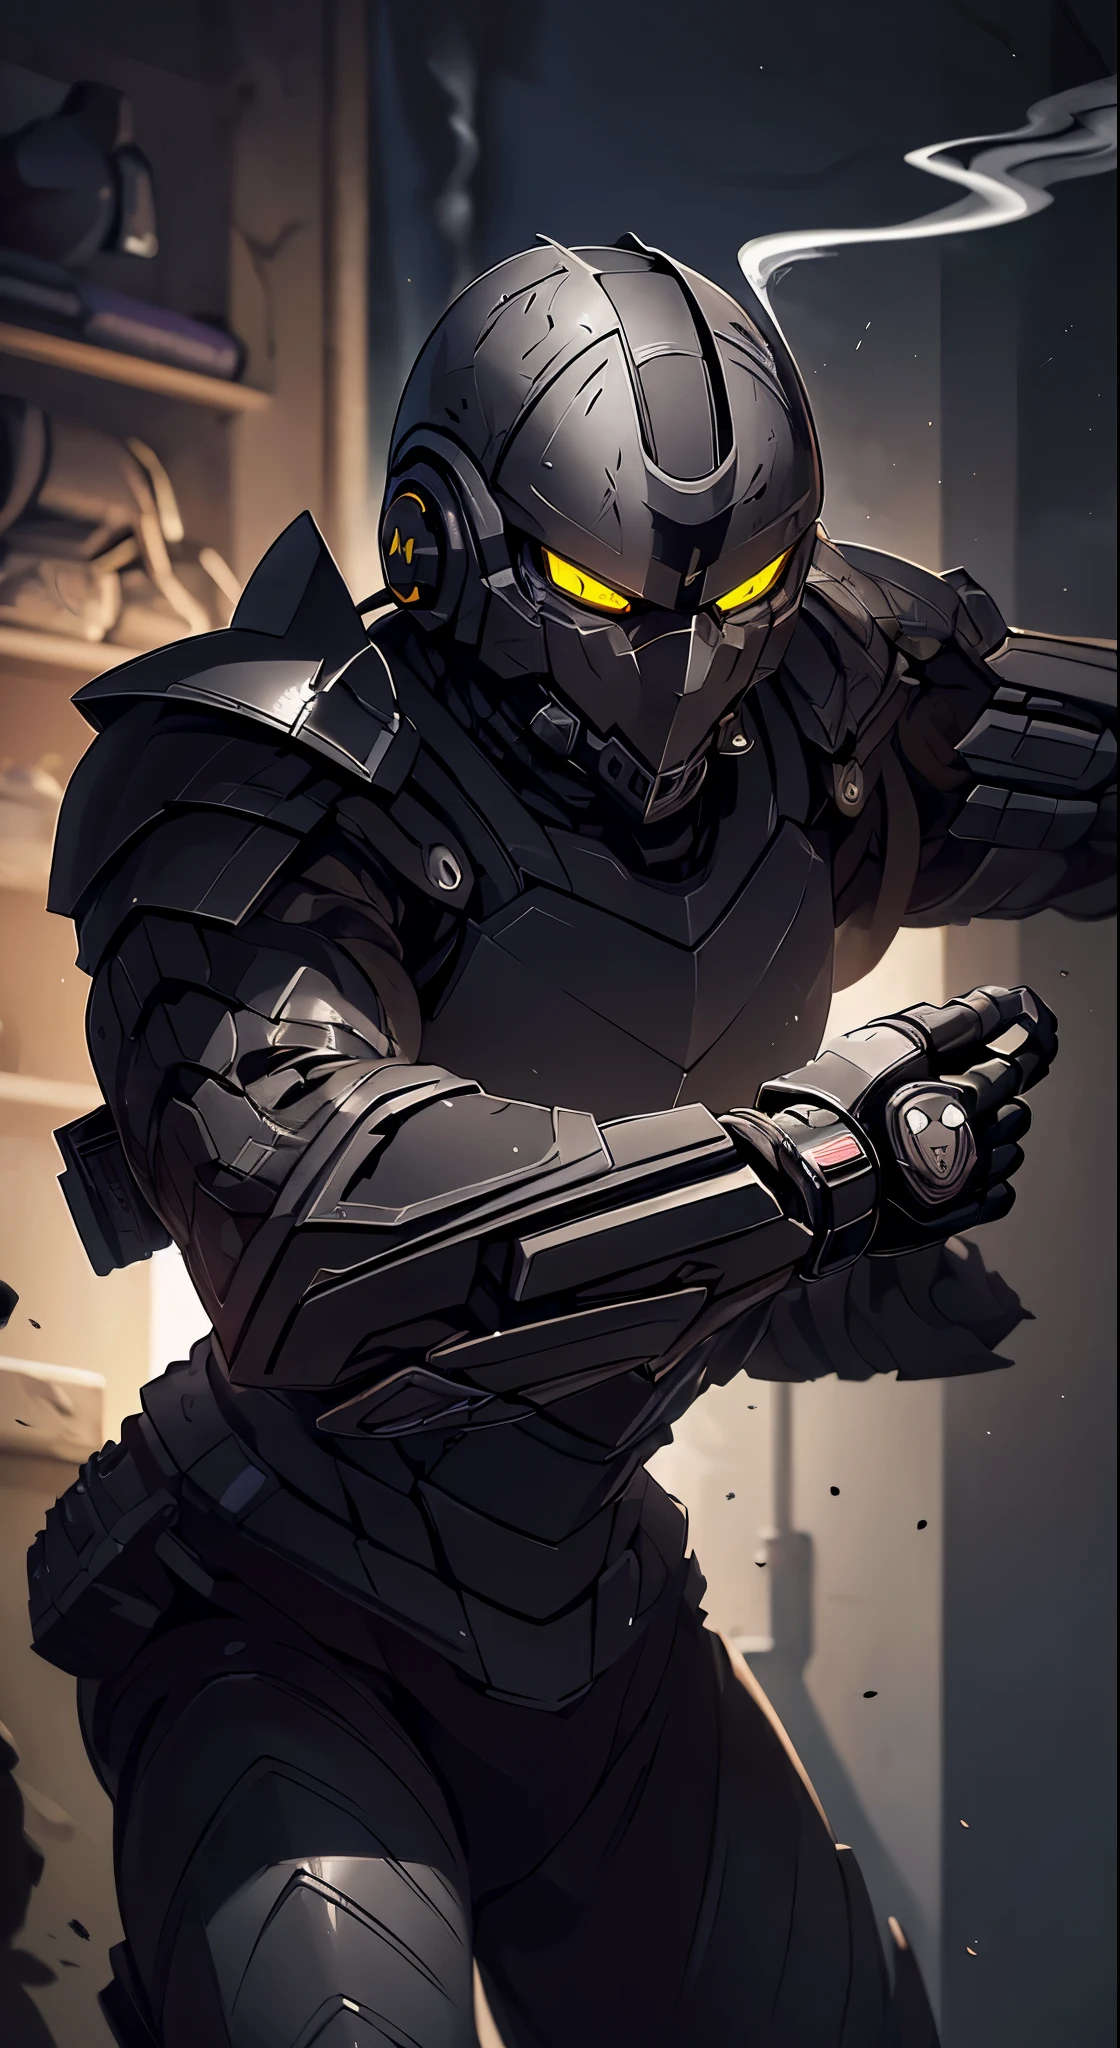 zxcrx, cyborg ninja wearing sleek, (grey and black armour:1.5) that incorporates various mechanical components, his face is covered by a helmet with a (black visor:1.3), arm-mounted blades, energy-based weaponry, ((smoke on background:1.4)), intricate, high detail, sharp focus, dramatic, photorealistic painting art by greg rutkowski